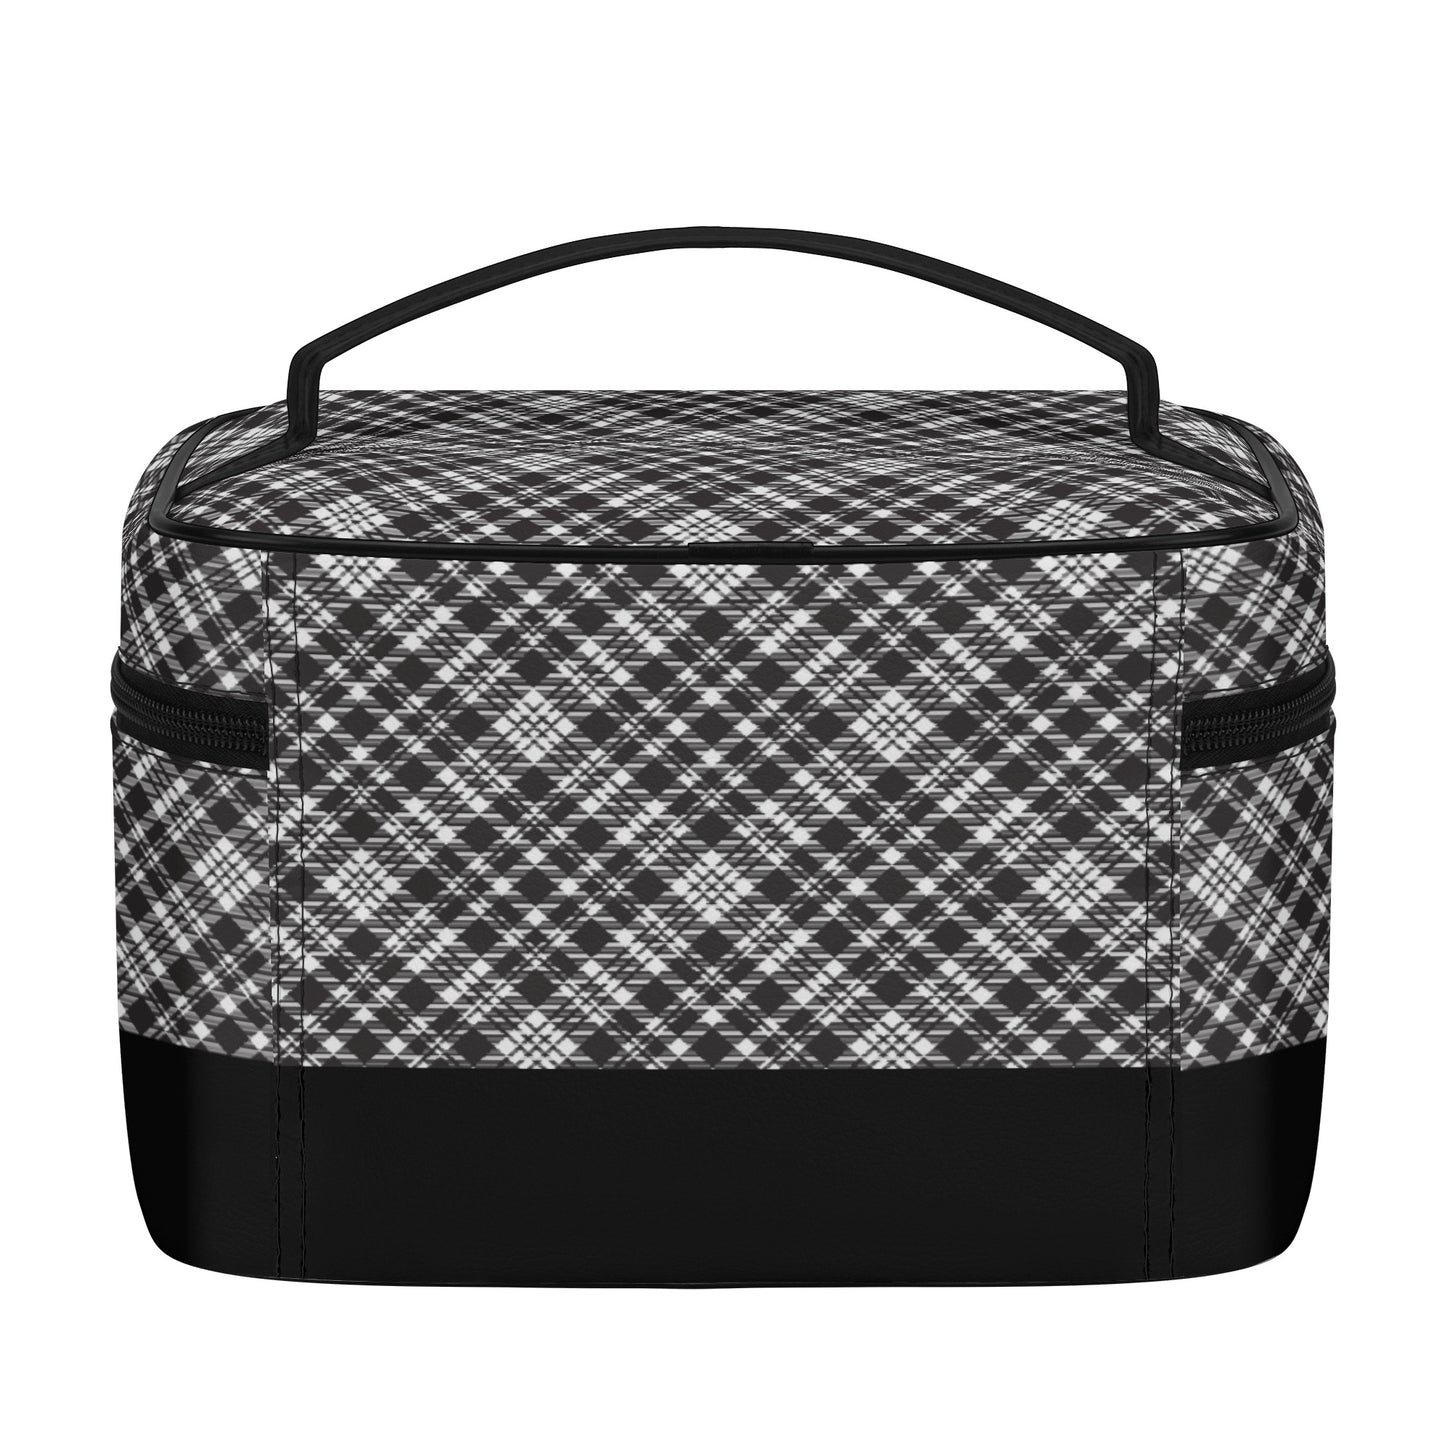 Chic Contrasting Black & Grey Argyle Plaid Pattern  with Black Band - Cosmetic or Toiletry Bag Faux Leather (PU)